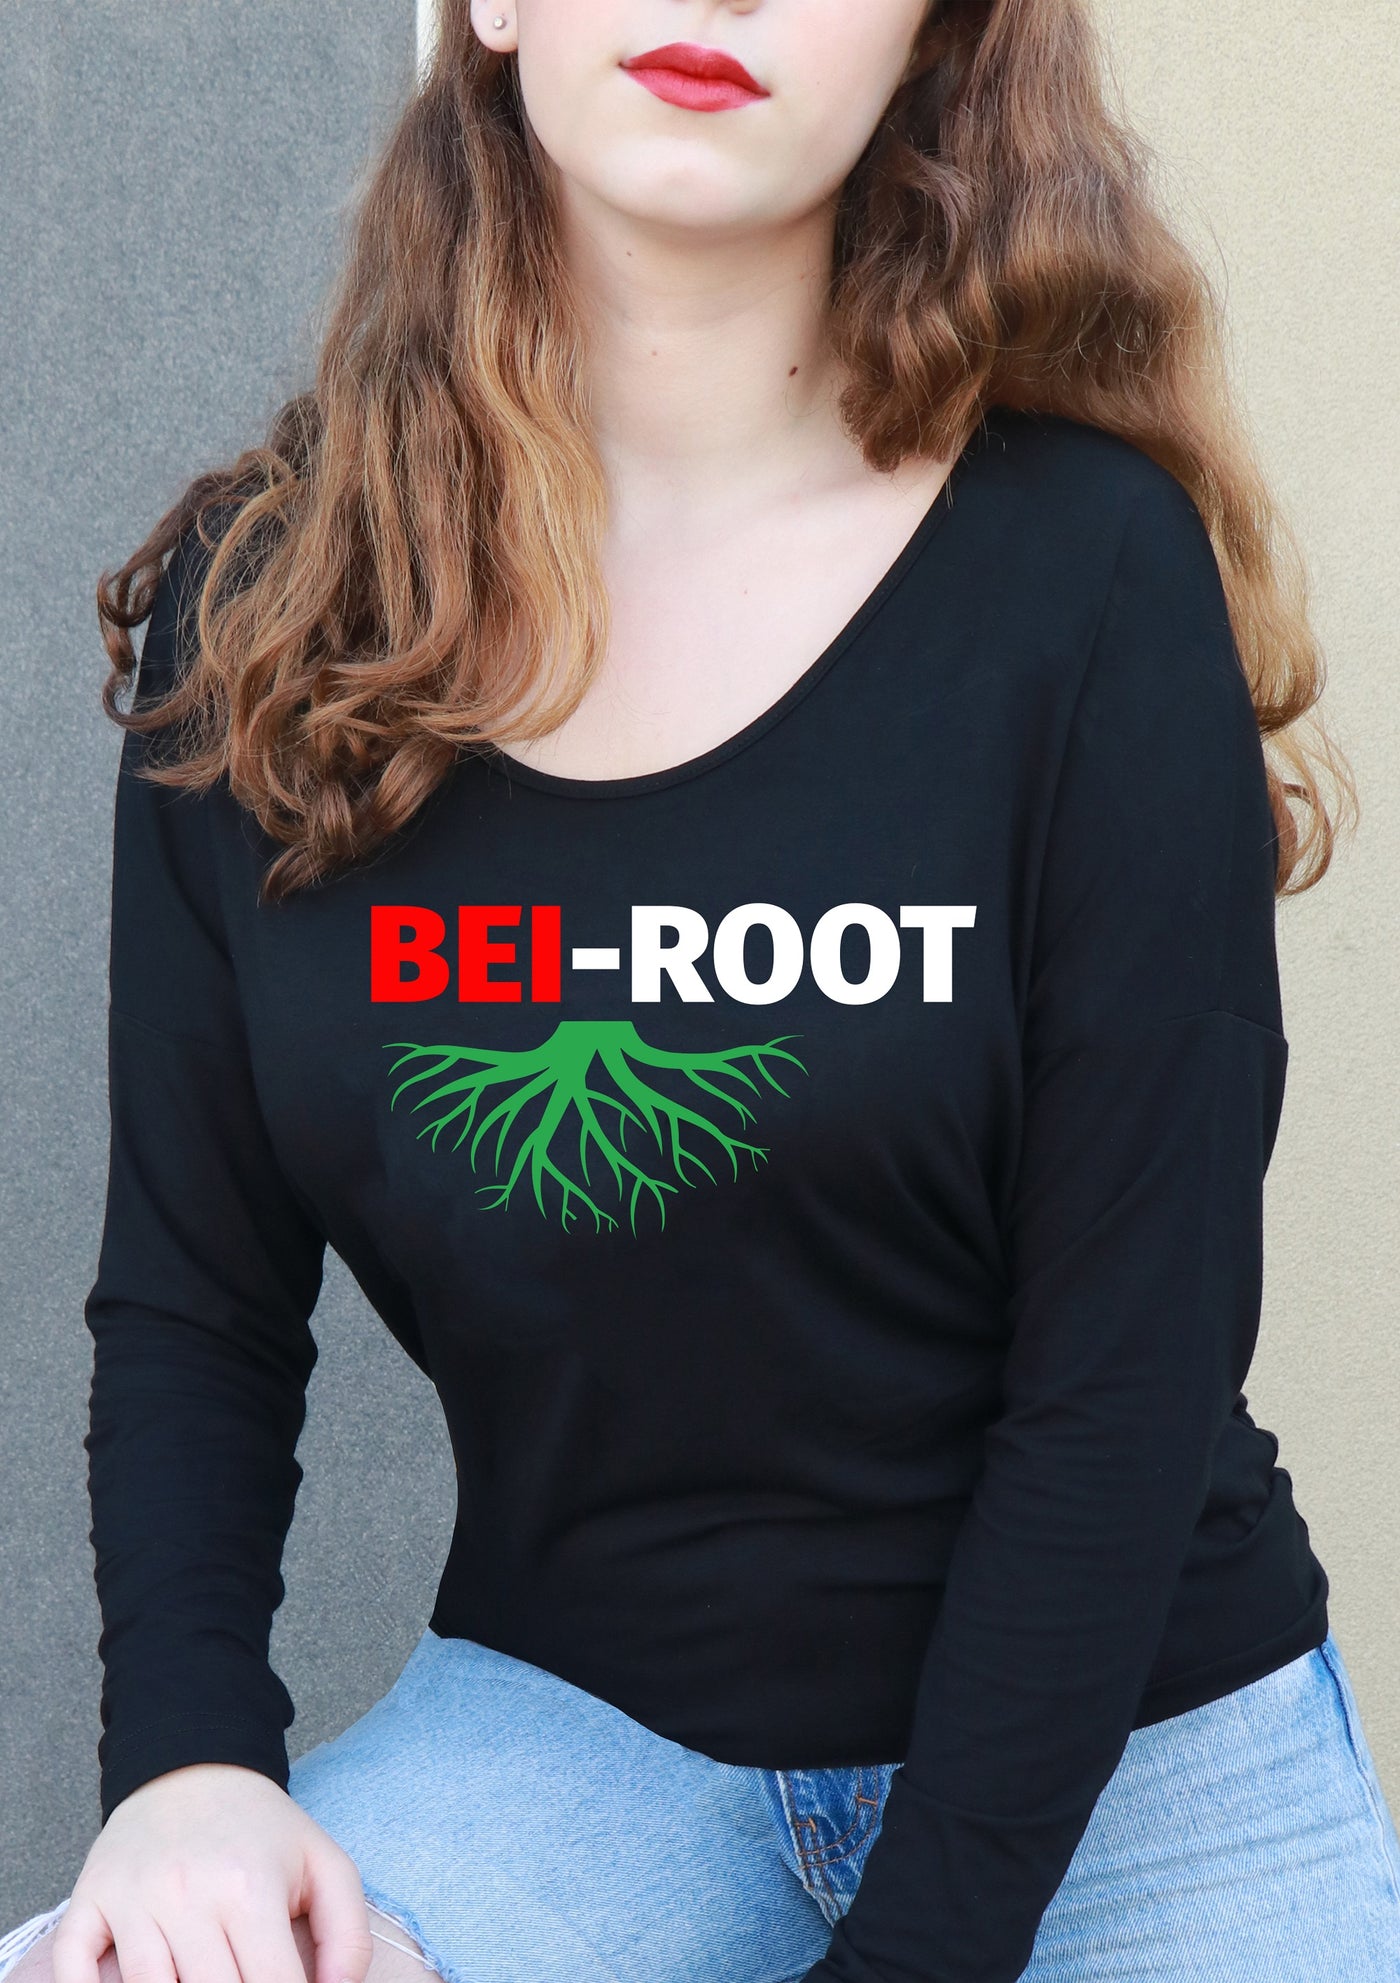 Shop The Latest Collection Of Bei-Root Lc1 Women Black V-Necked  Long Sleeve T-Shirt In Lebanon